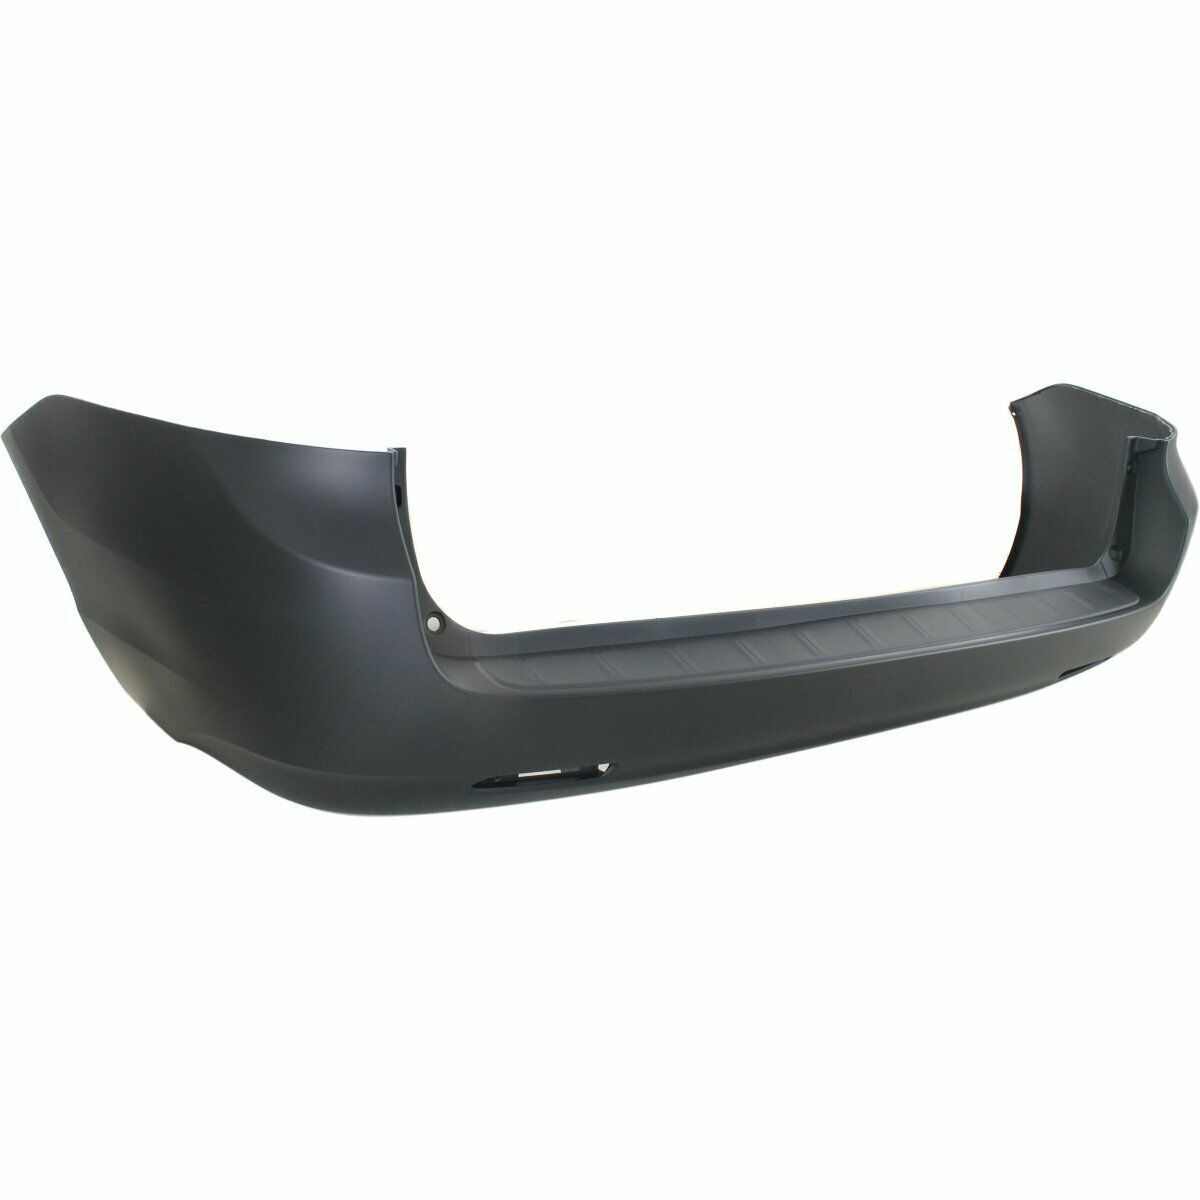 2011-2020 TOYOTA SIENNA Rear Bumper Painted to Match